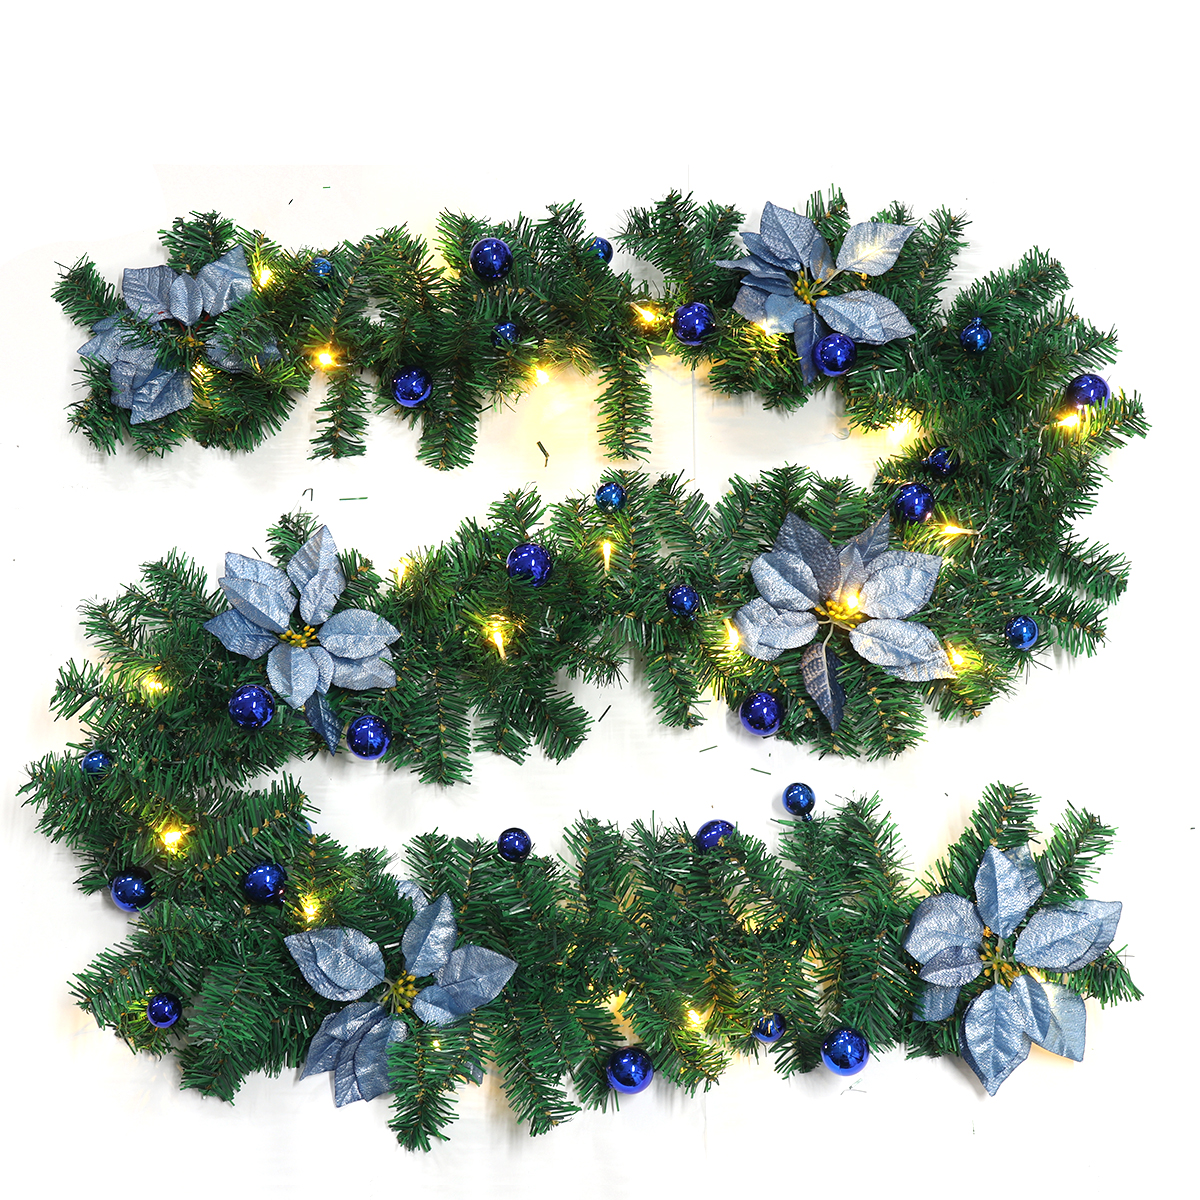 27m-Christmas-Garland-Colorful-Fireplaces-Stairs-LED-Decorated-Garlands-Decor-1821550-2